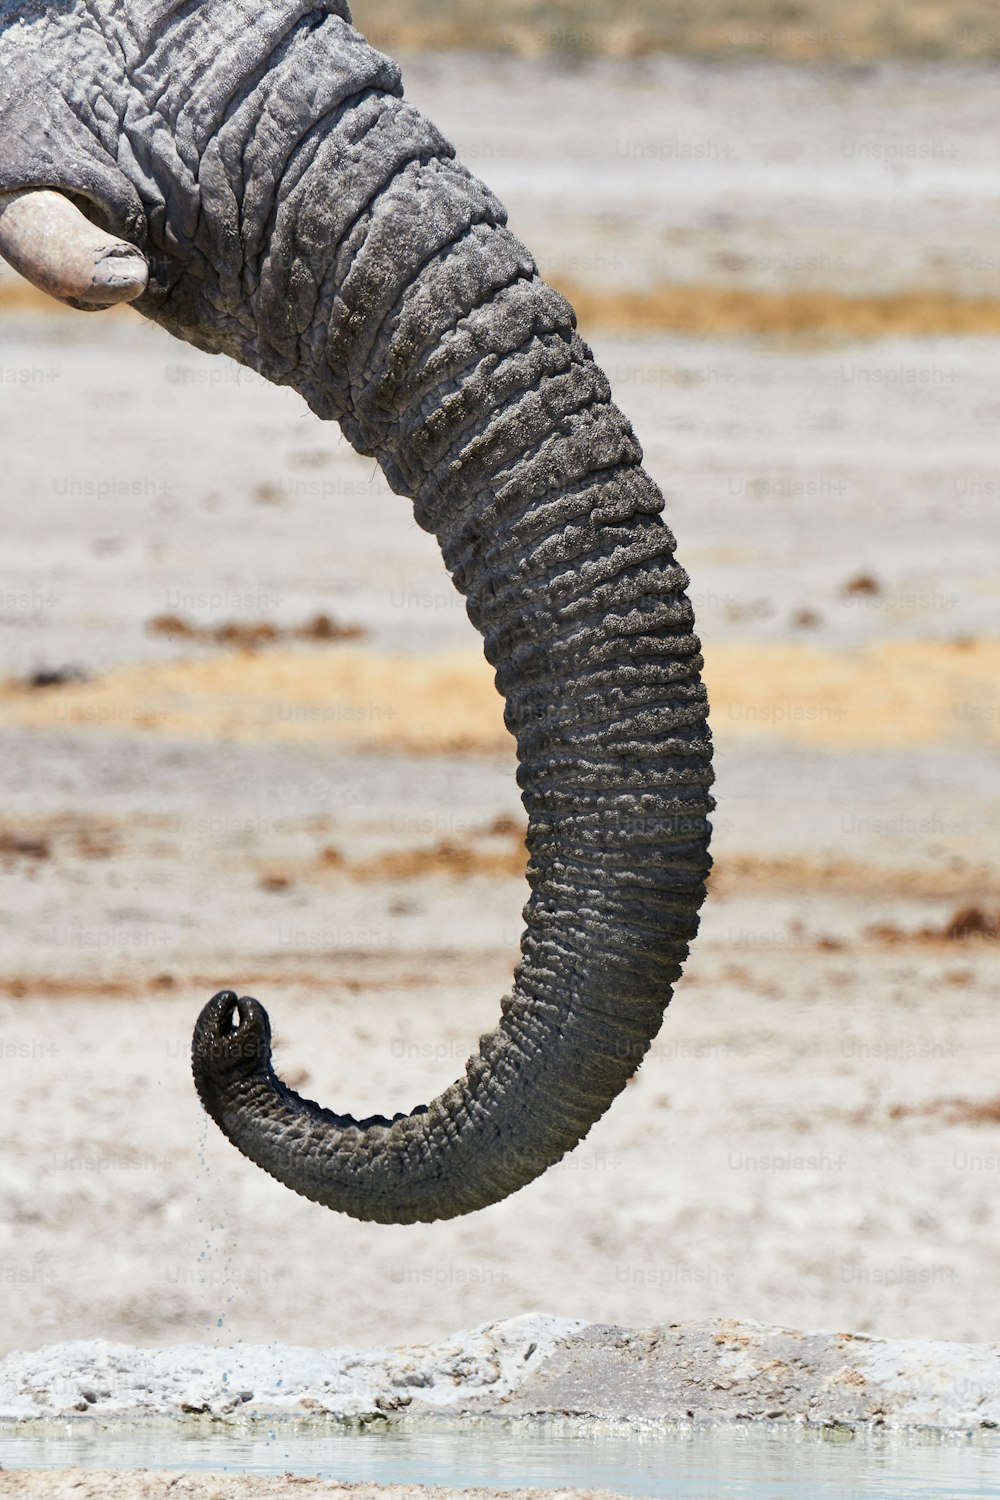 Trunk of an African elephant in Etosha National Park